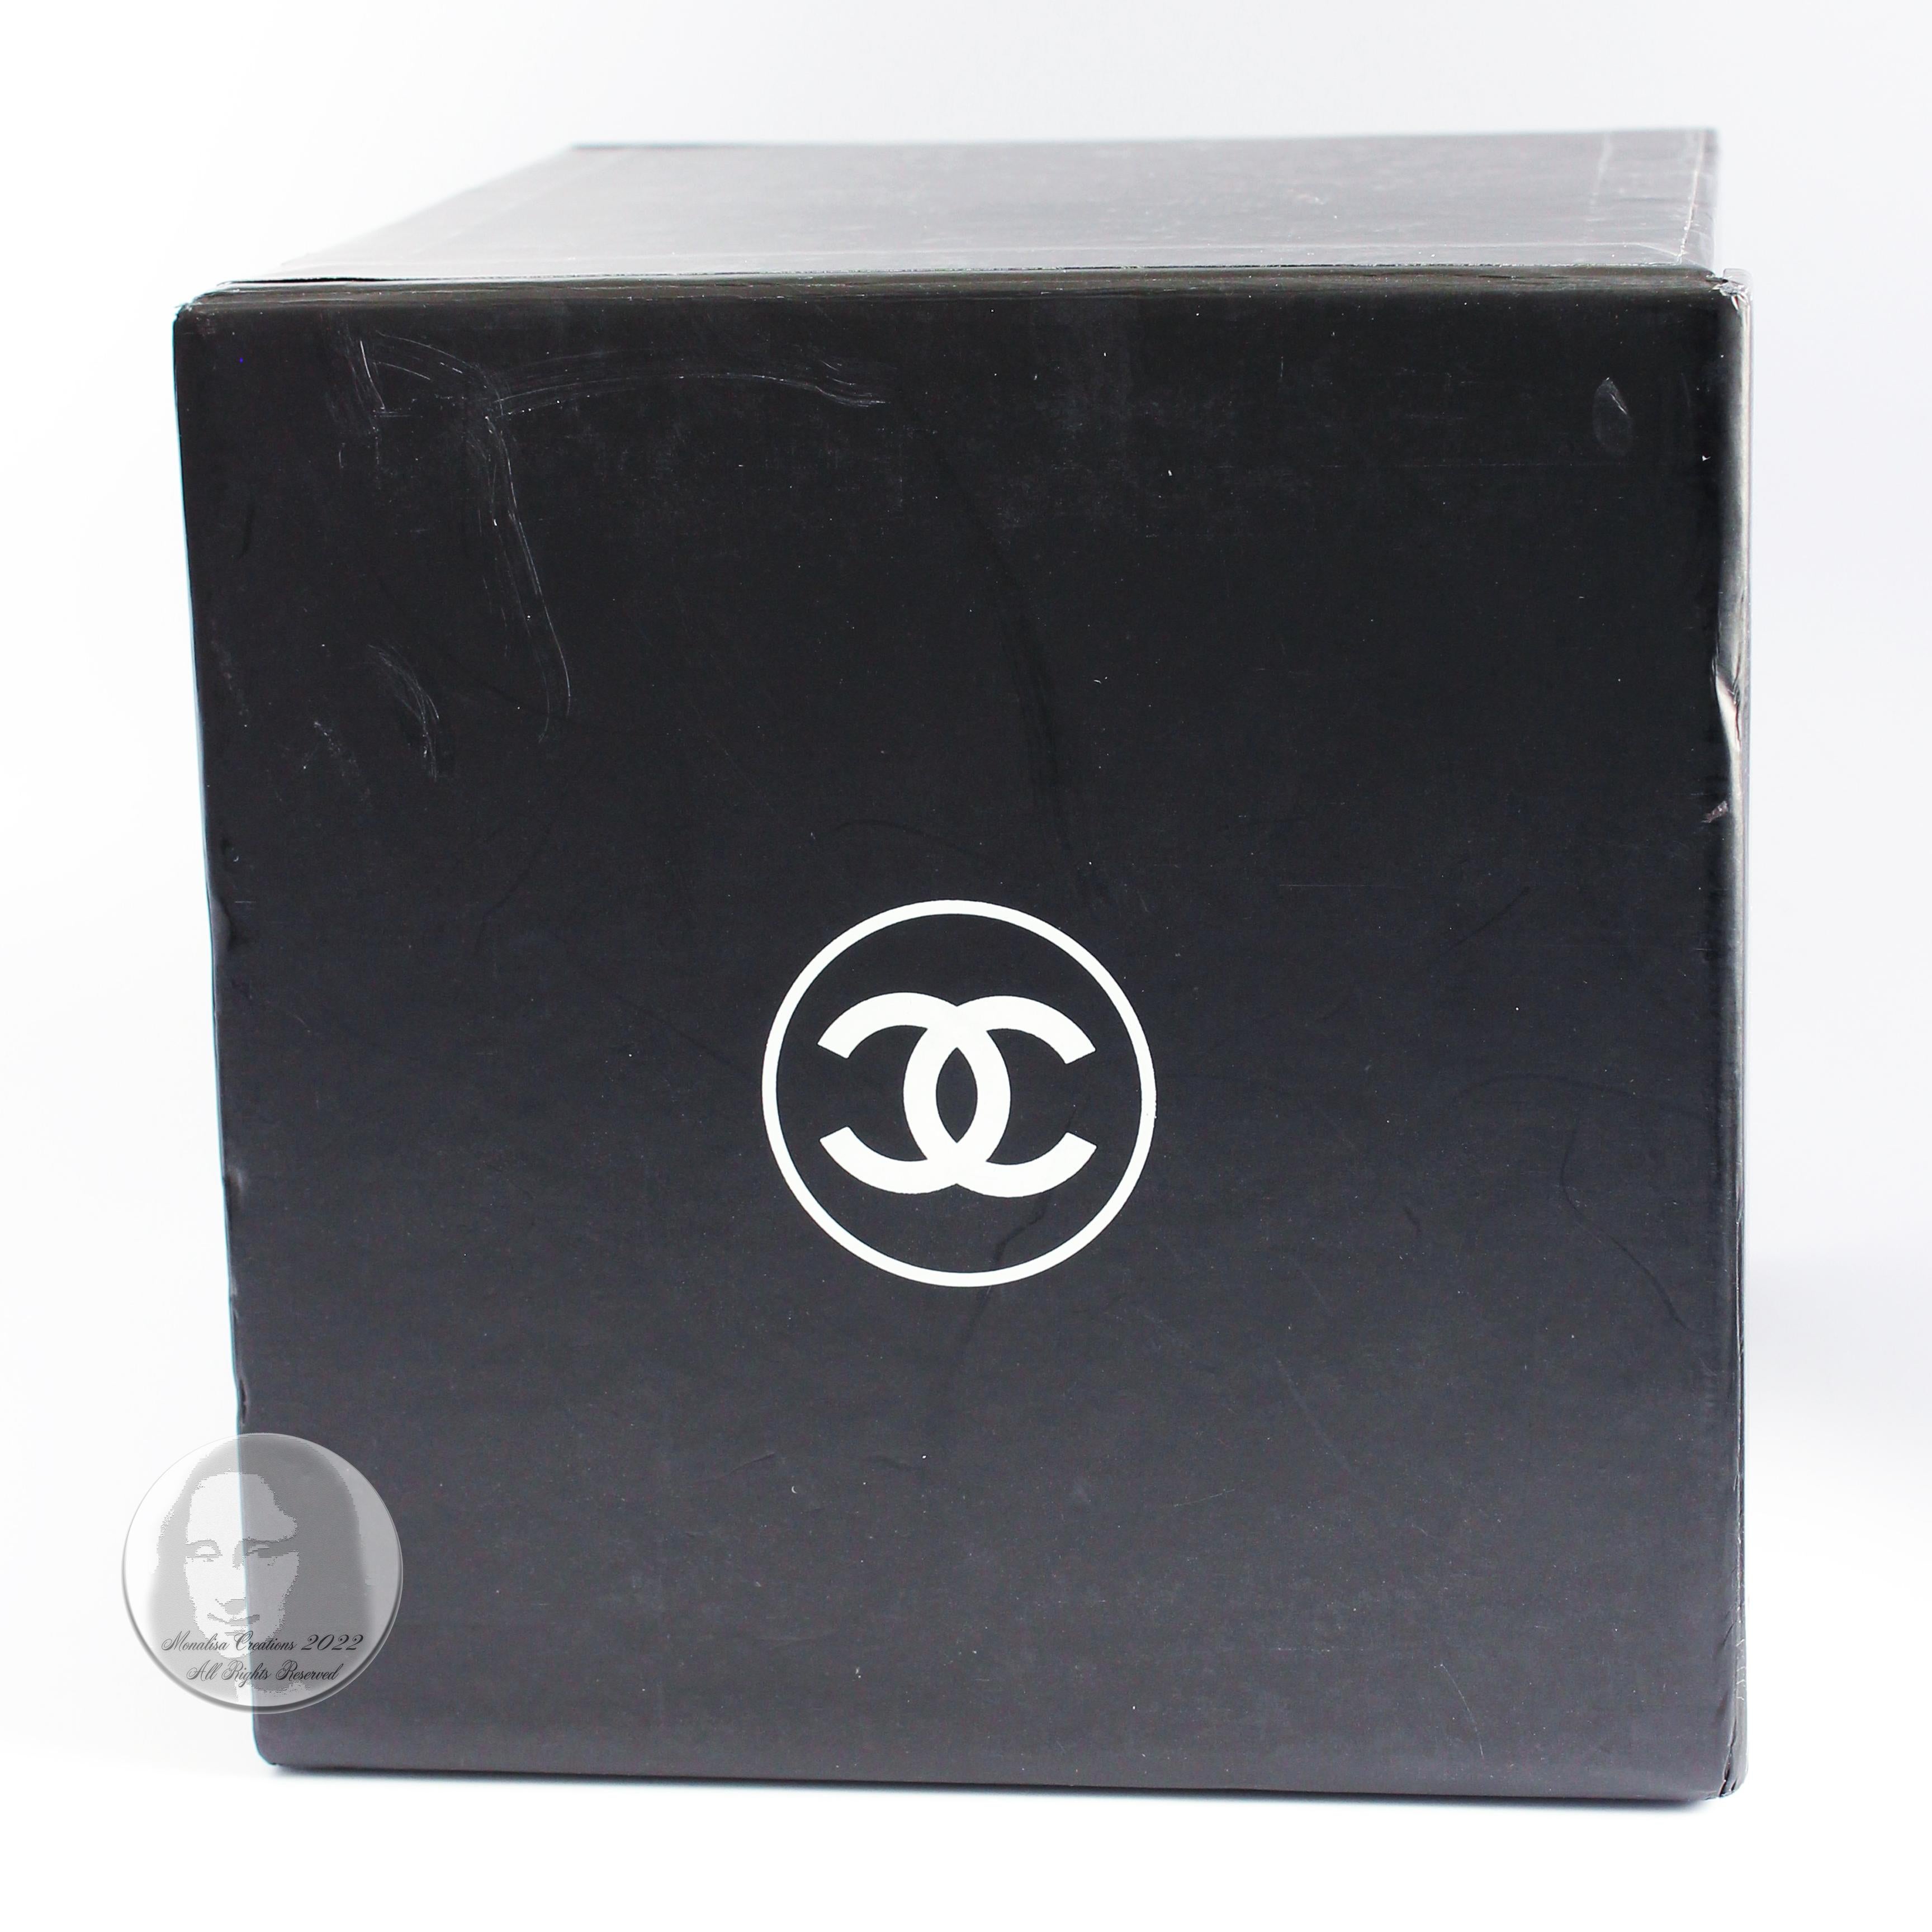 Chanel Snow Globe 2015 Large Shopping Bags No 5 Bottle Home Decor Limited in Box 8